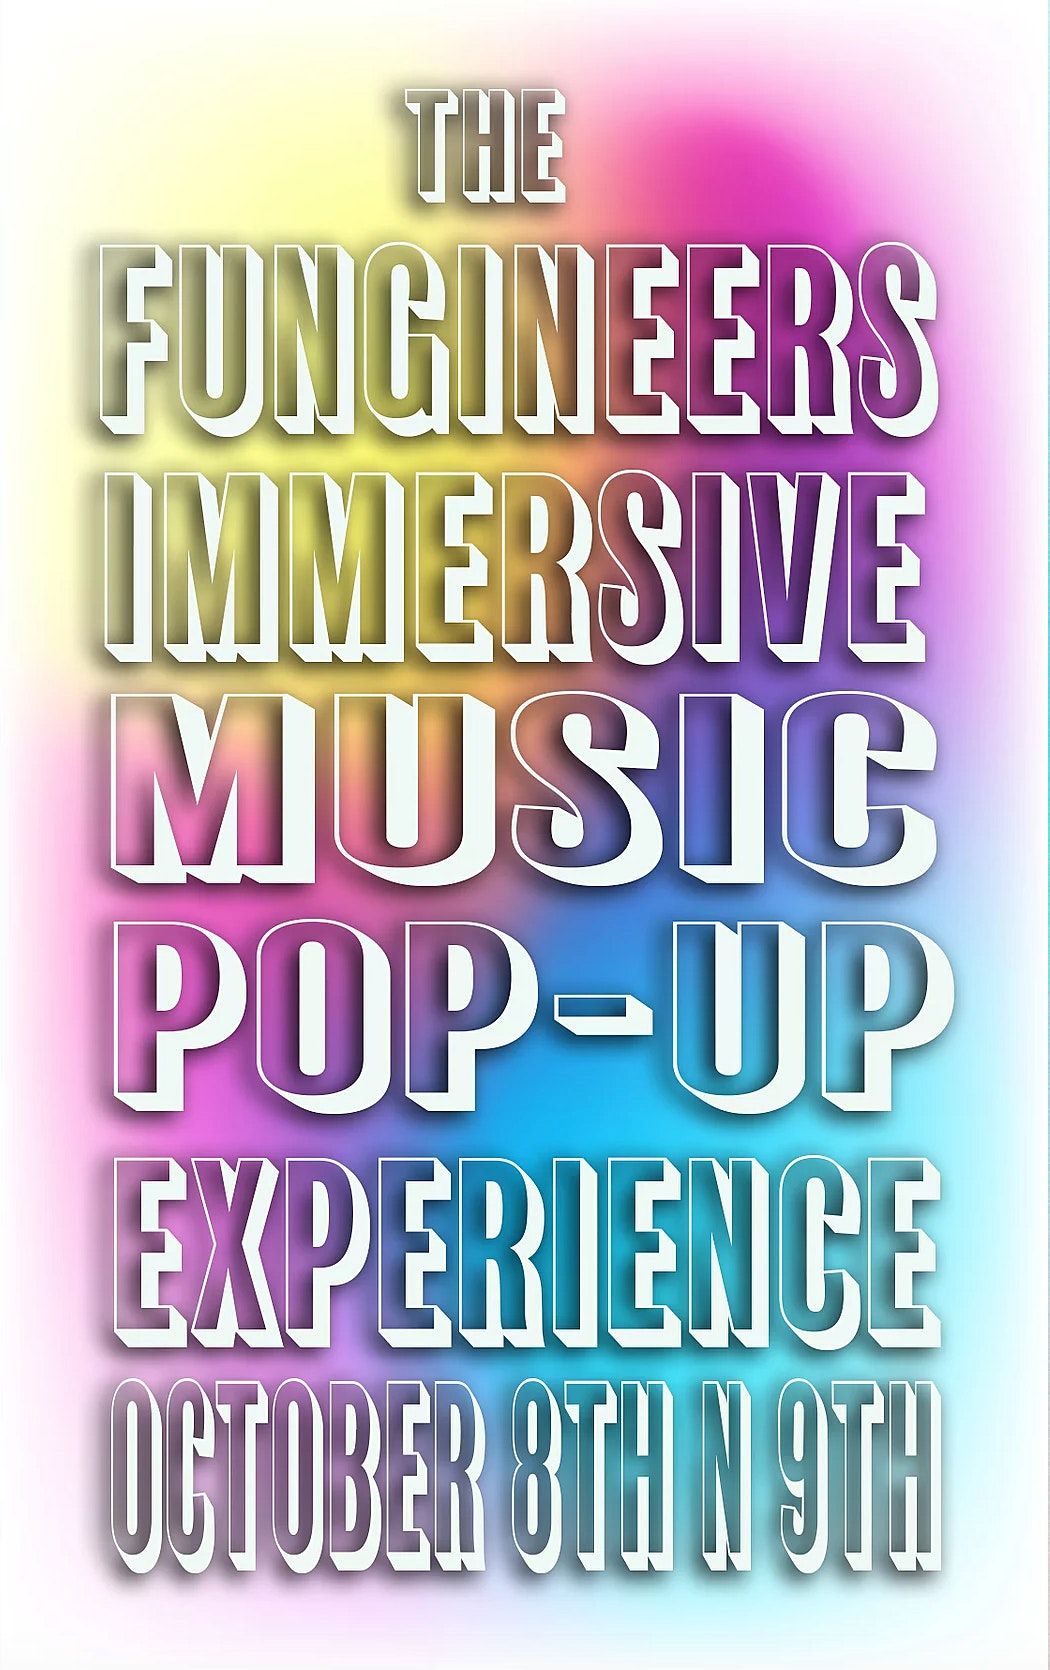 The Fungineers Immersive Music Pop-Up Experience